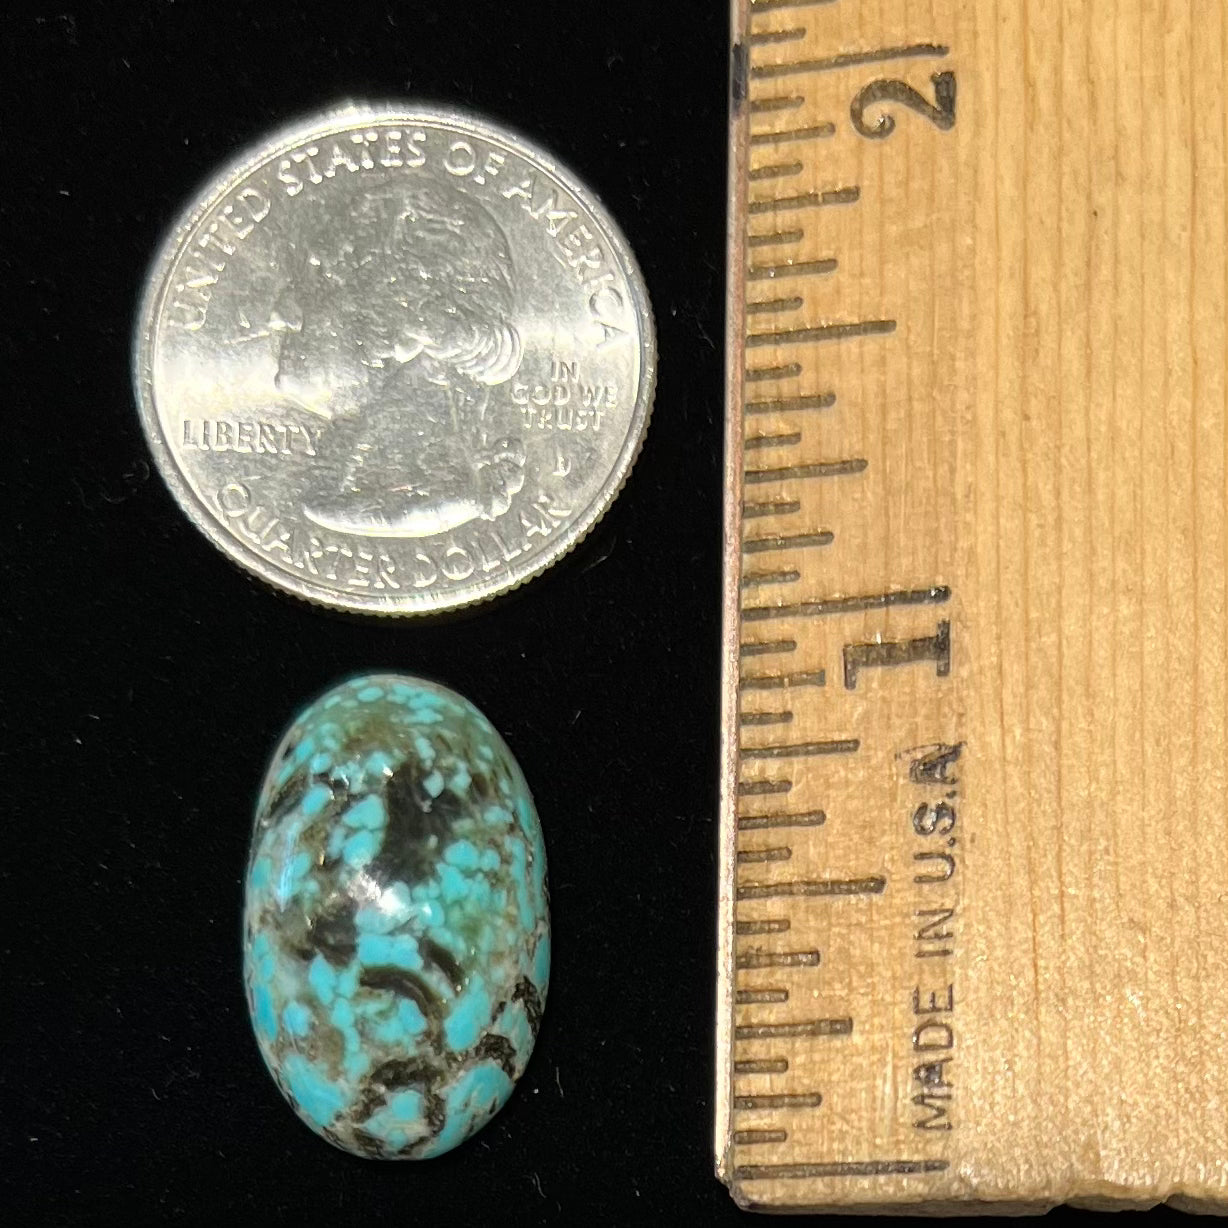 A loose, oval cabochon cut turquoise stone from Valley Blue Mine in Lander County, Nevada.